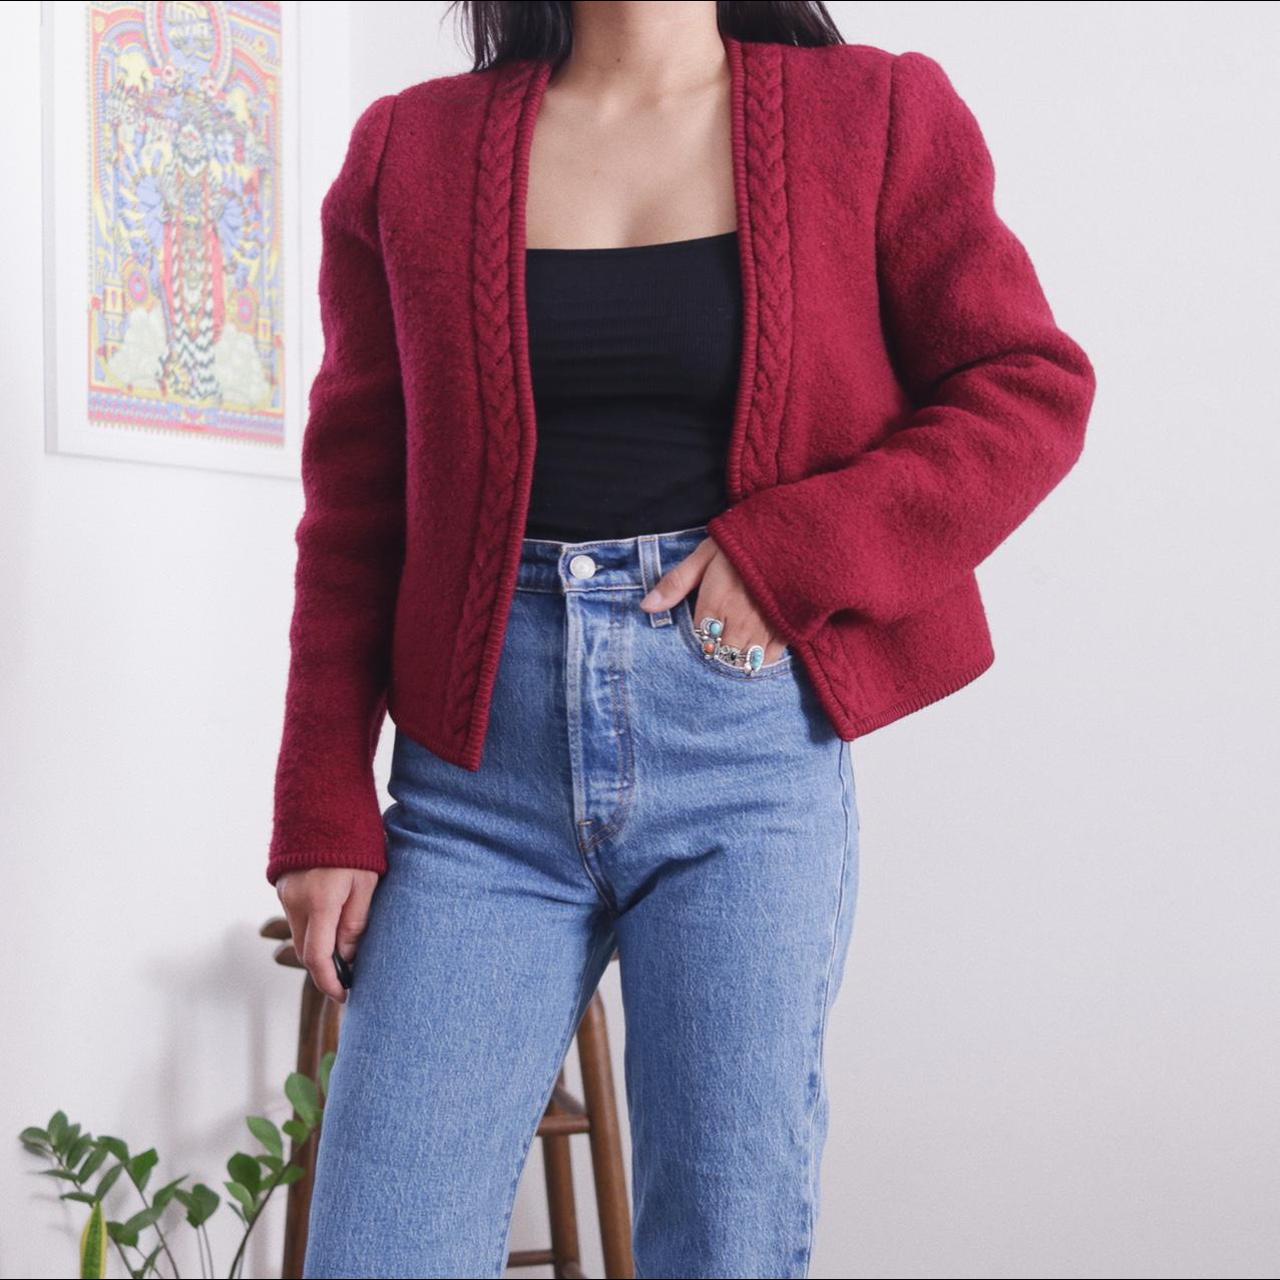 American Vintage Women's Red and Burgundy Cardigan